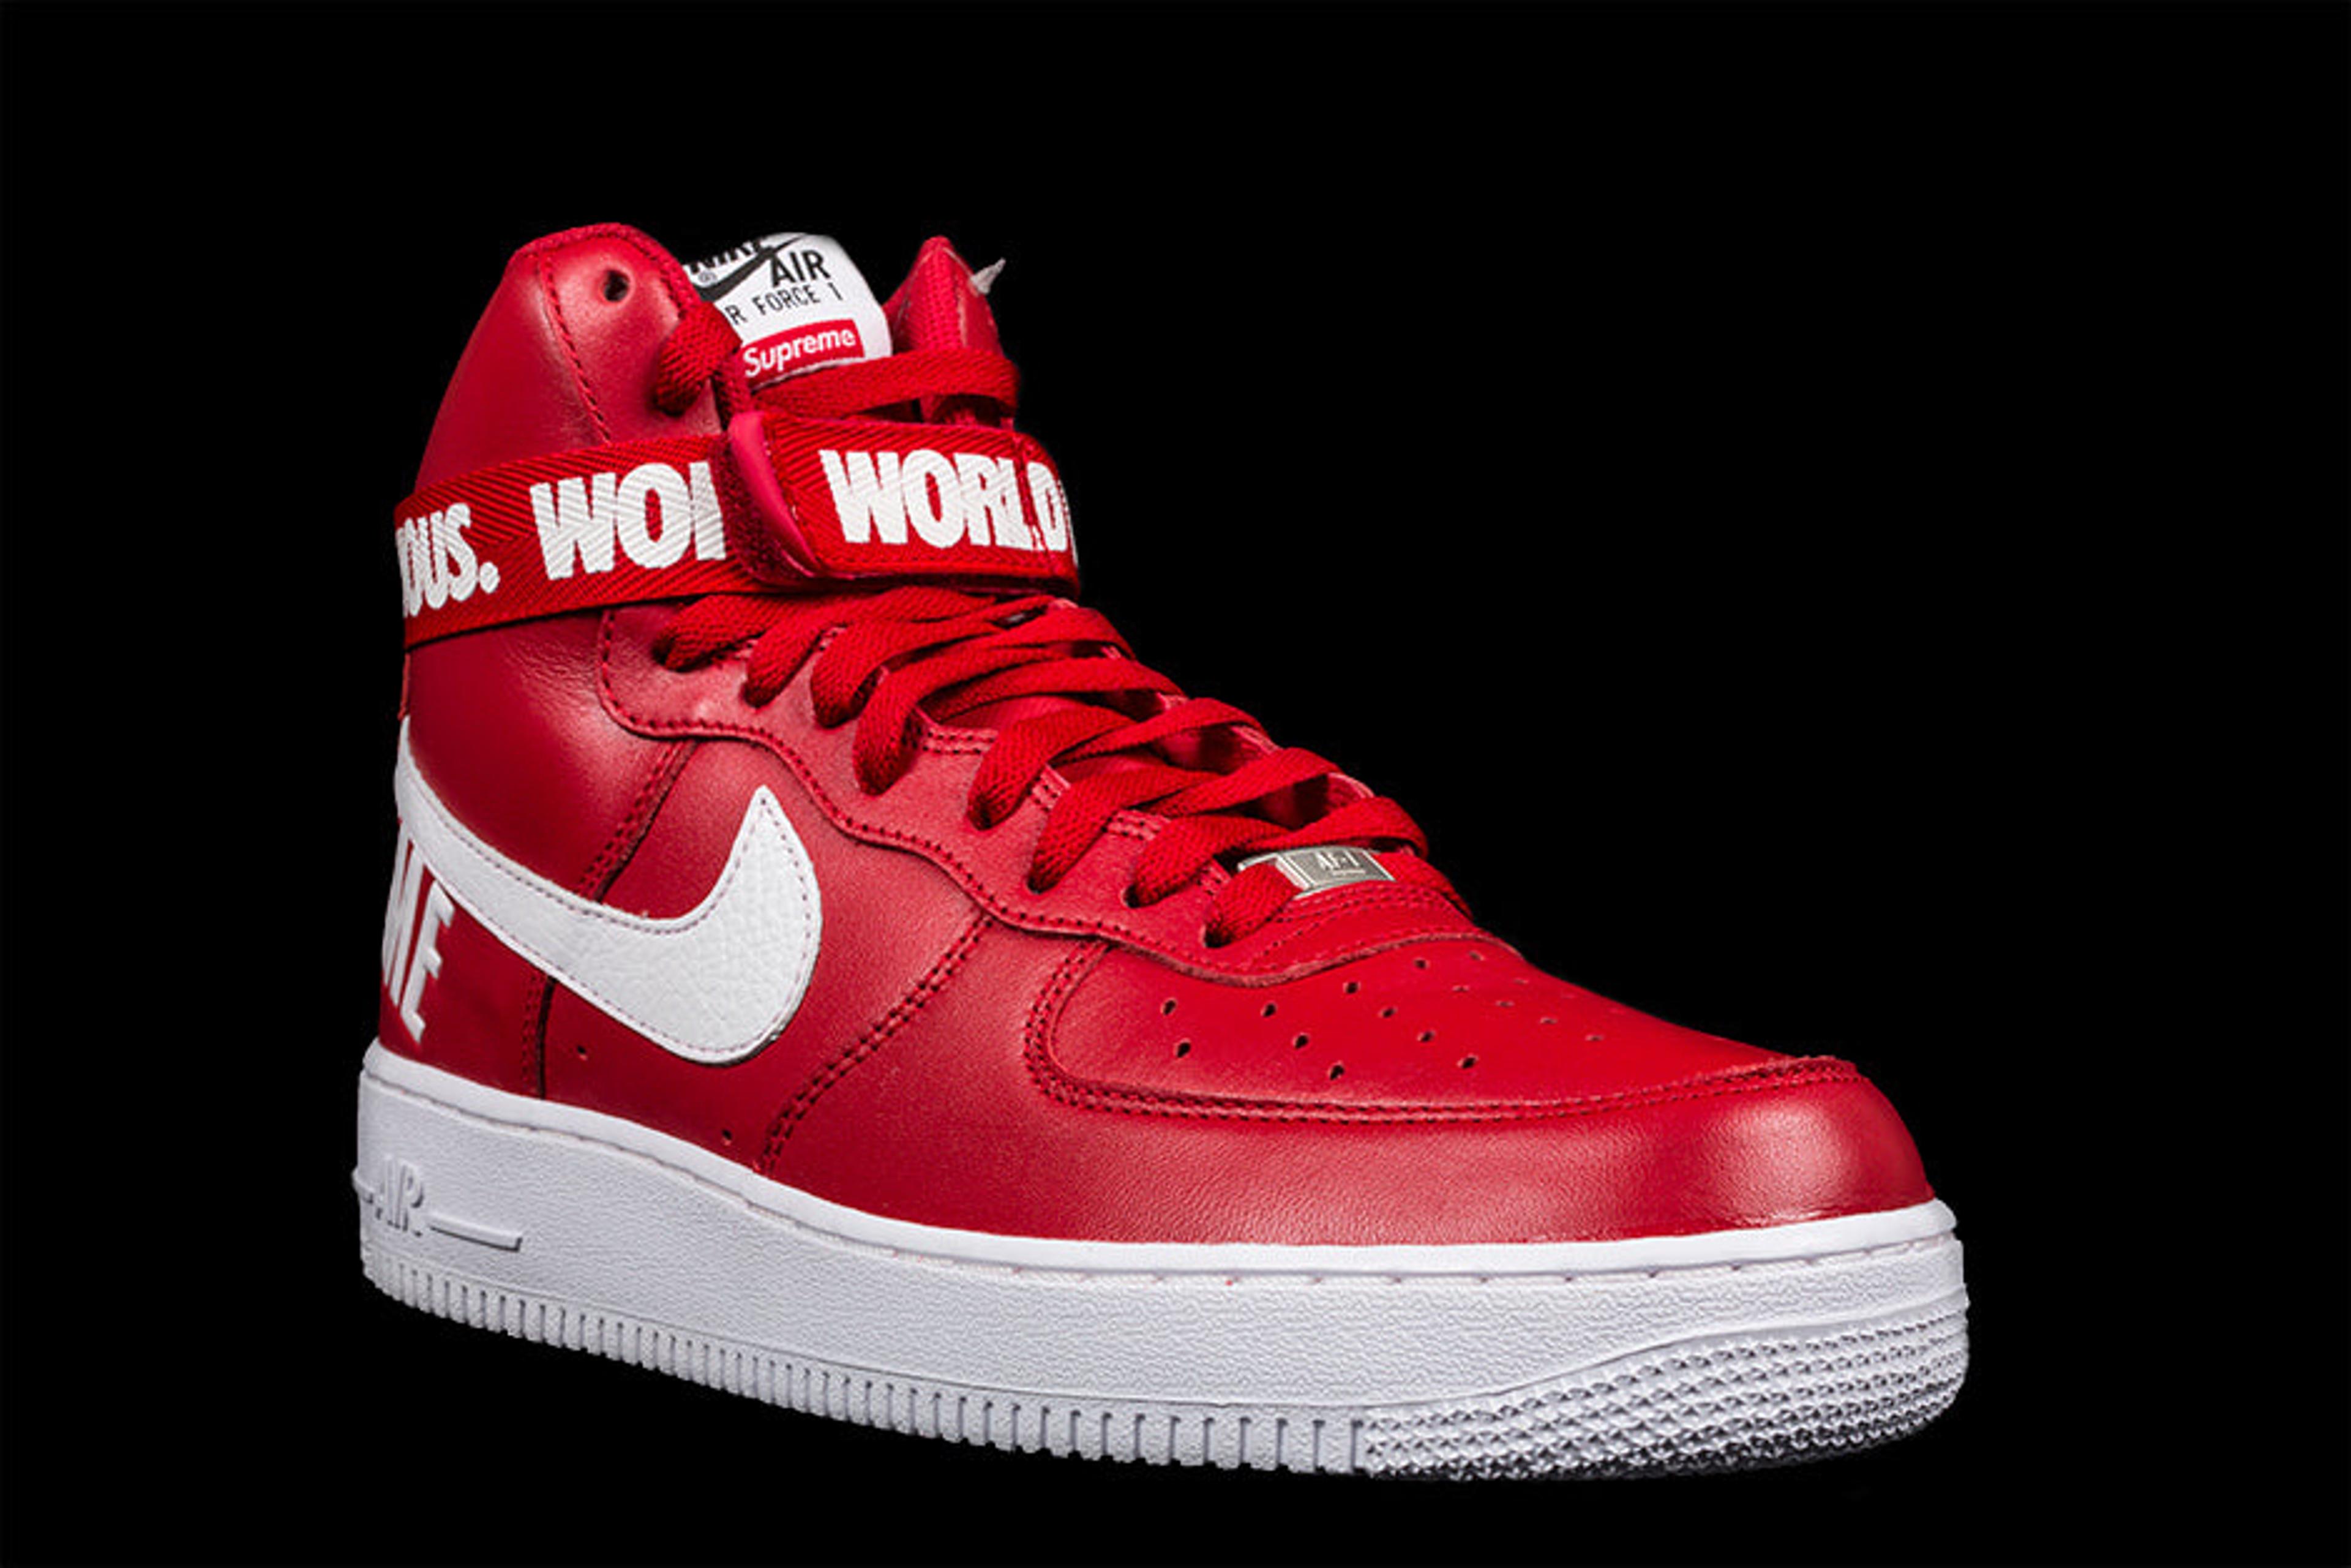 Buy Supreme x Air Force 1 High SP 'Red' - 698696 610